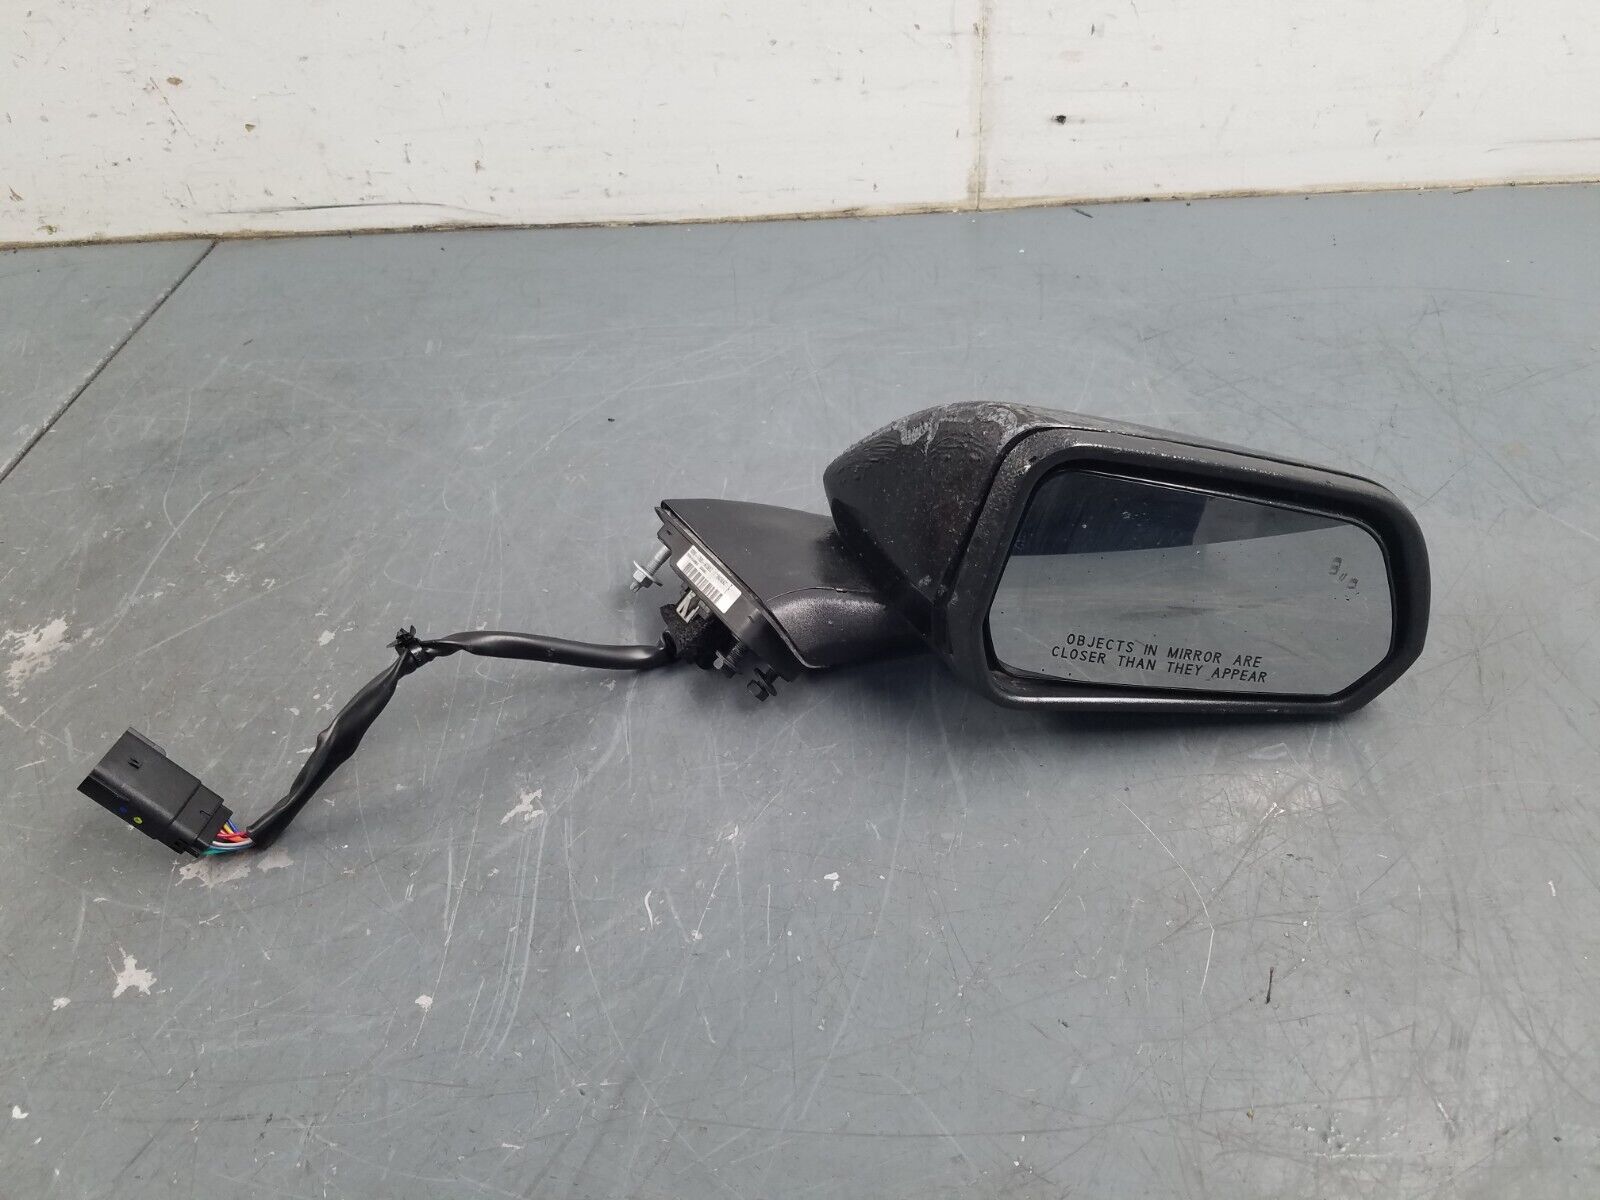 2022 Ford Mustang Shelby GT500 Right Passenger Side Mirror - Damage #1100 S7